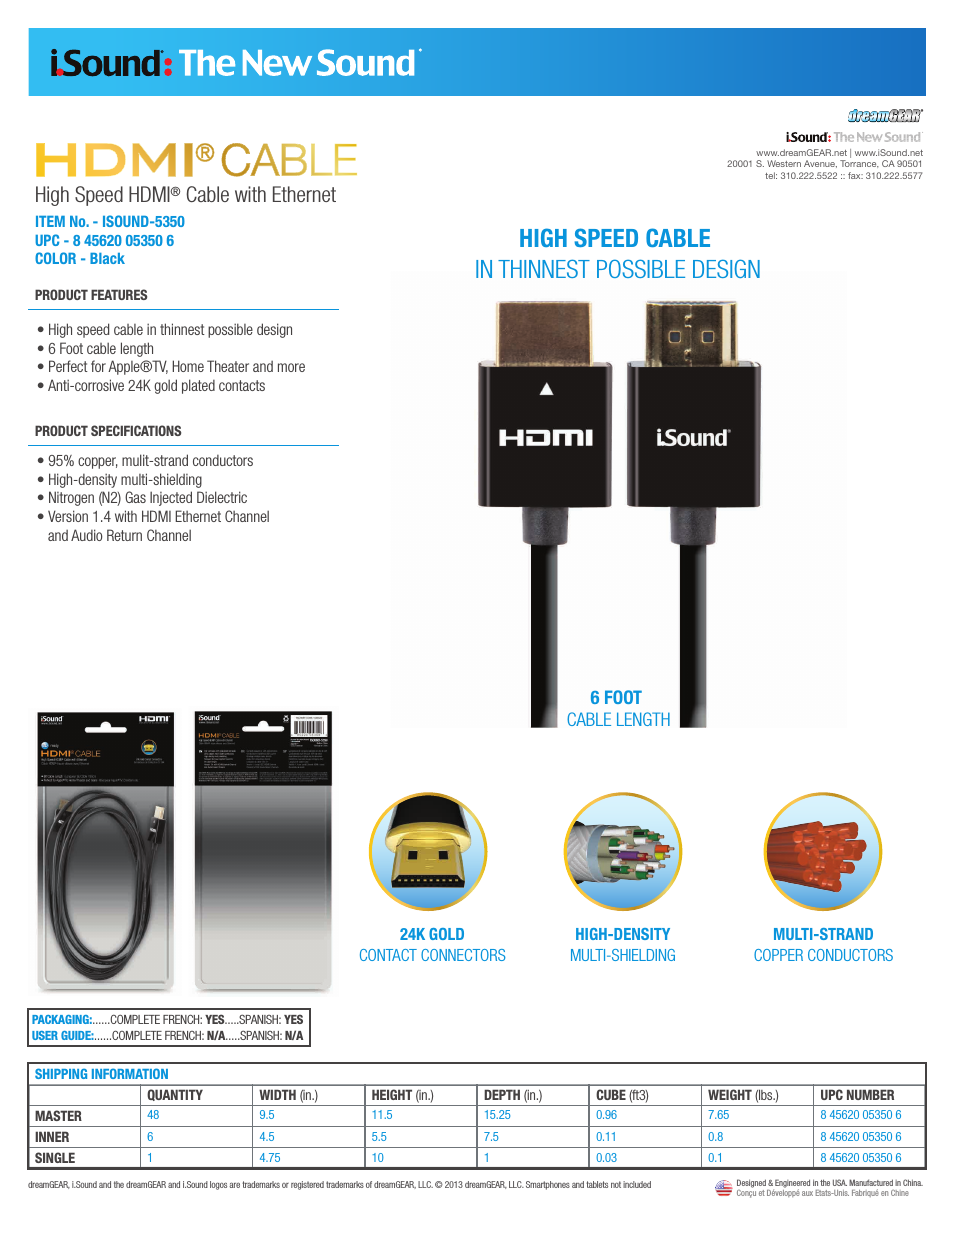 Super-Slim HDMI Cable - Sell Sheet